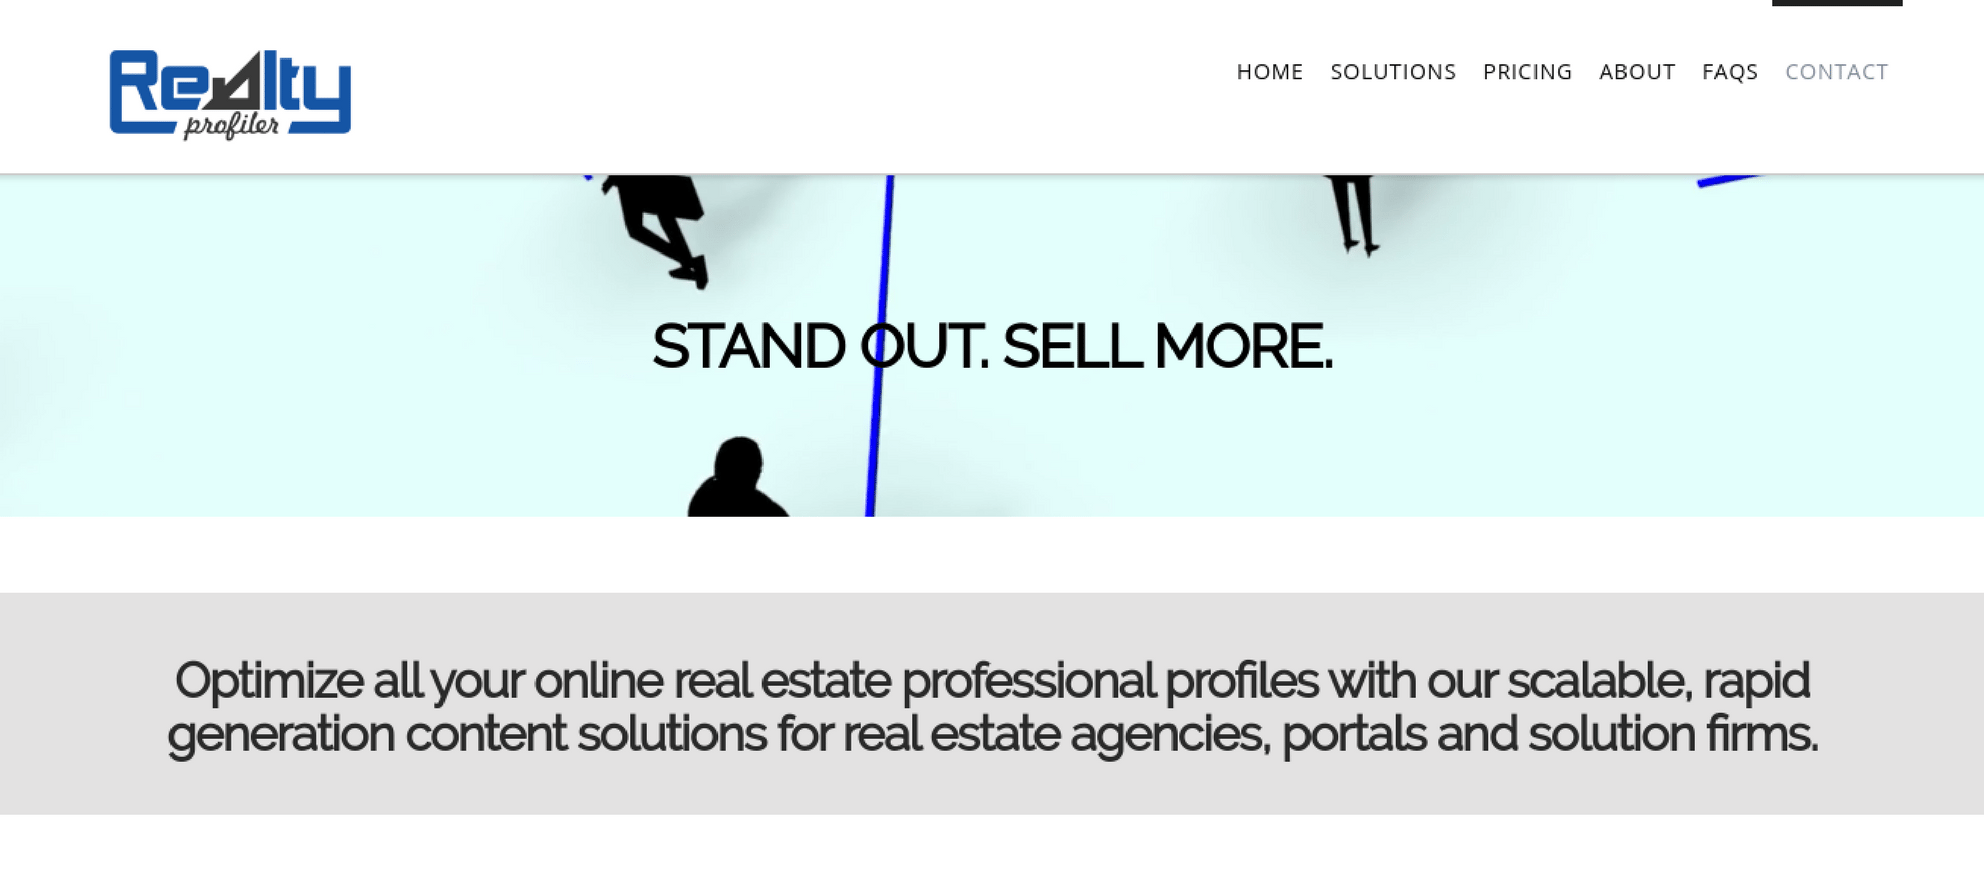 This A.I. will write your real estate profile for you